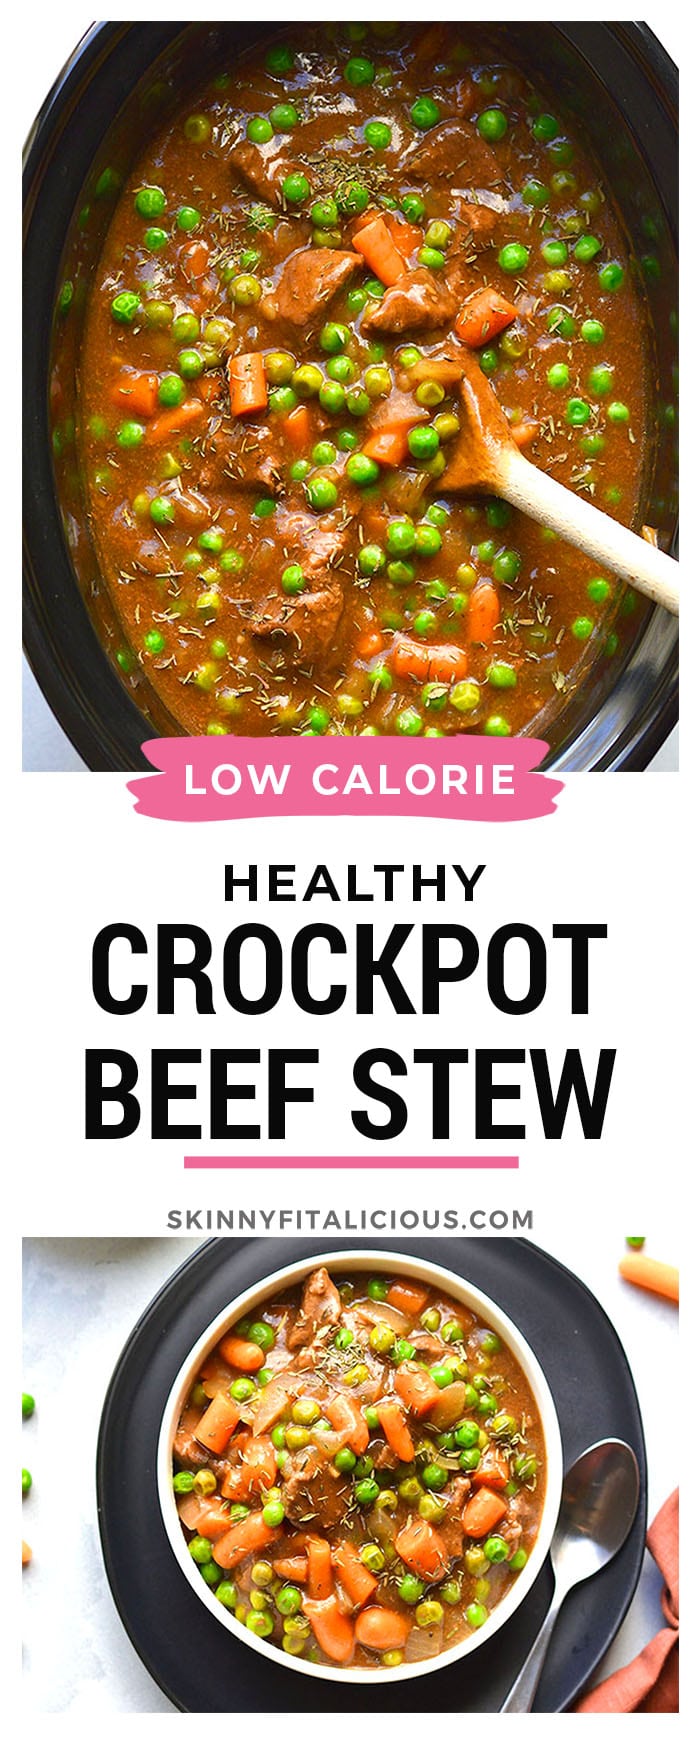 Healthy Crockpot Beef Stew is a lower calorie recipe made gluten free in a slow cooker. A classic recipe made better for you!